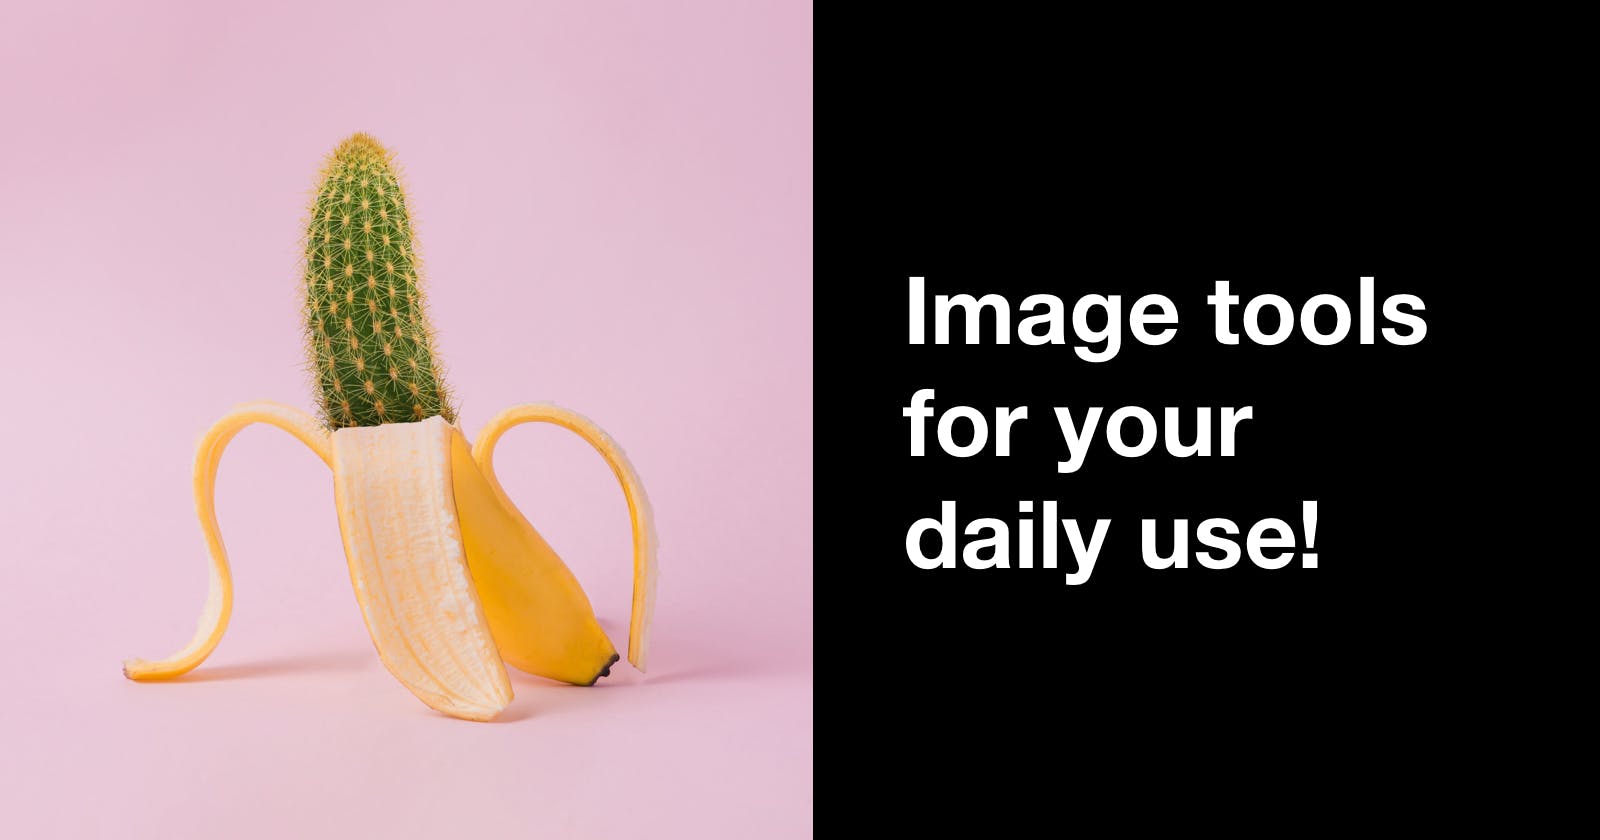 Image tools for your daily use.